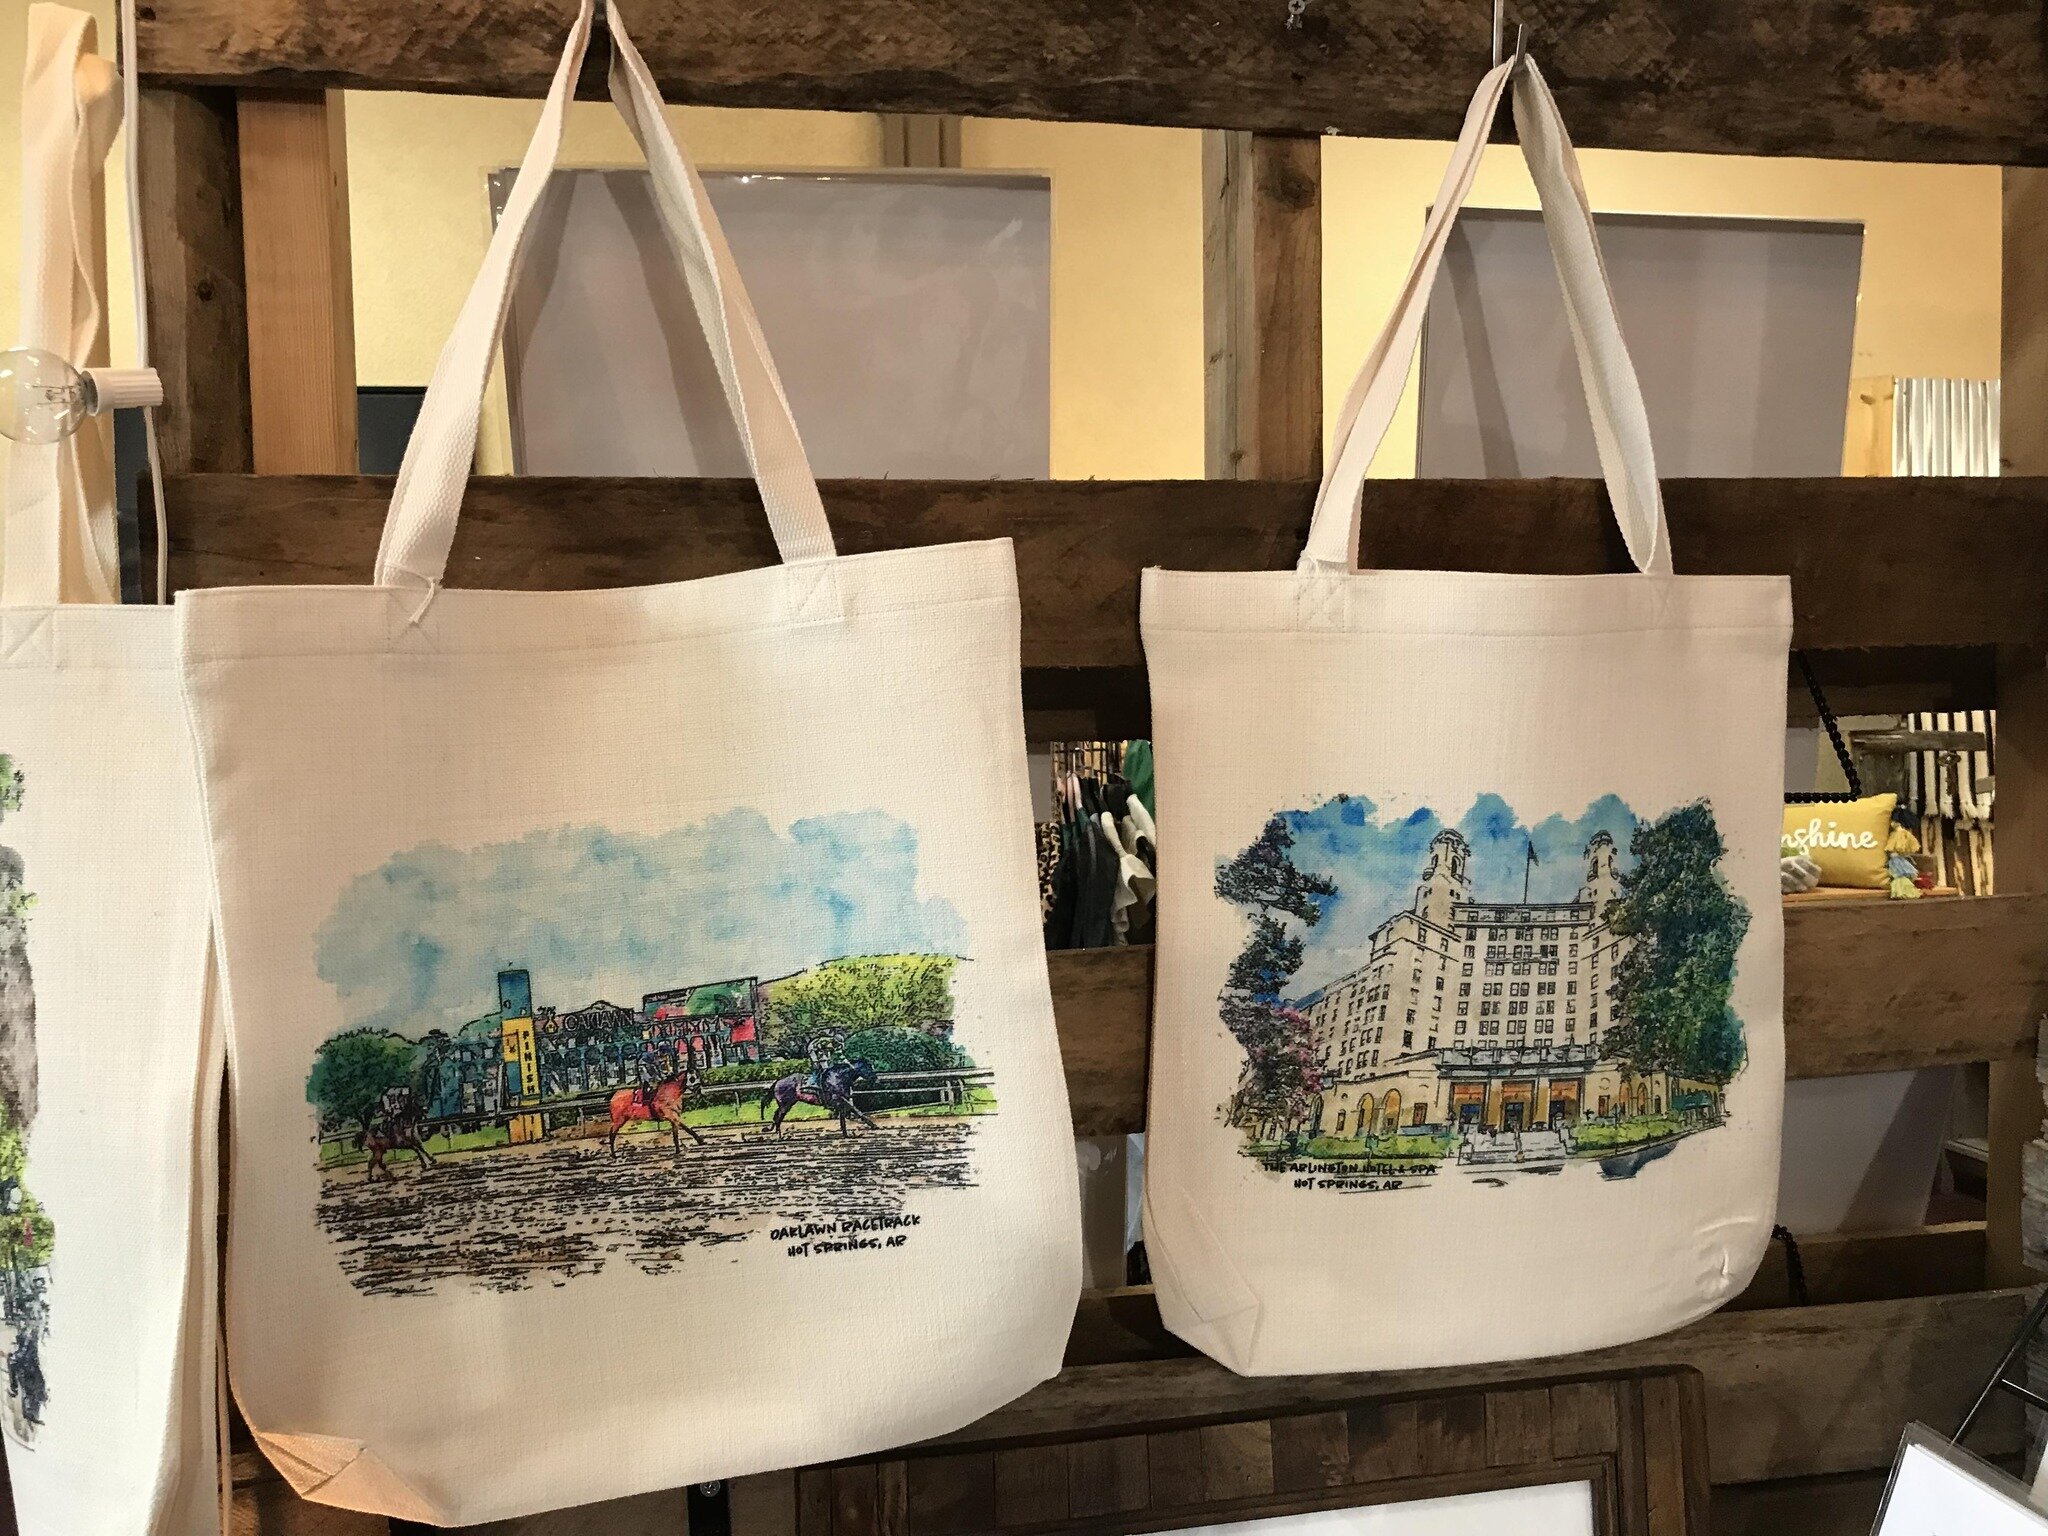 Looking for cool Hot Springs Arkansas #souvenirs ?  These great #totebags (Oaklawn Racetrack, Arlington Hotel, Ohio Club) are only available at the The Downtowner Marketplace on Central Avenue.  You have to check them out! @thedowntownermarketplace @